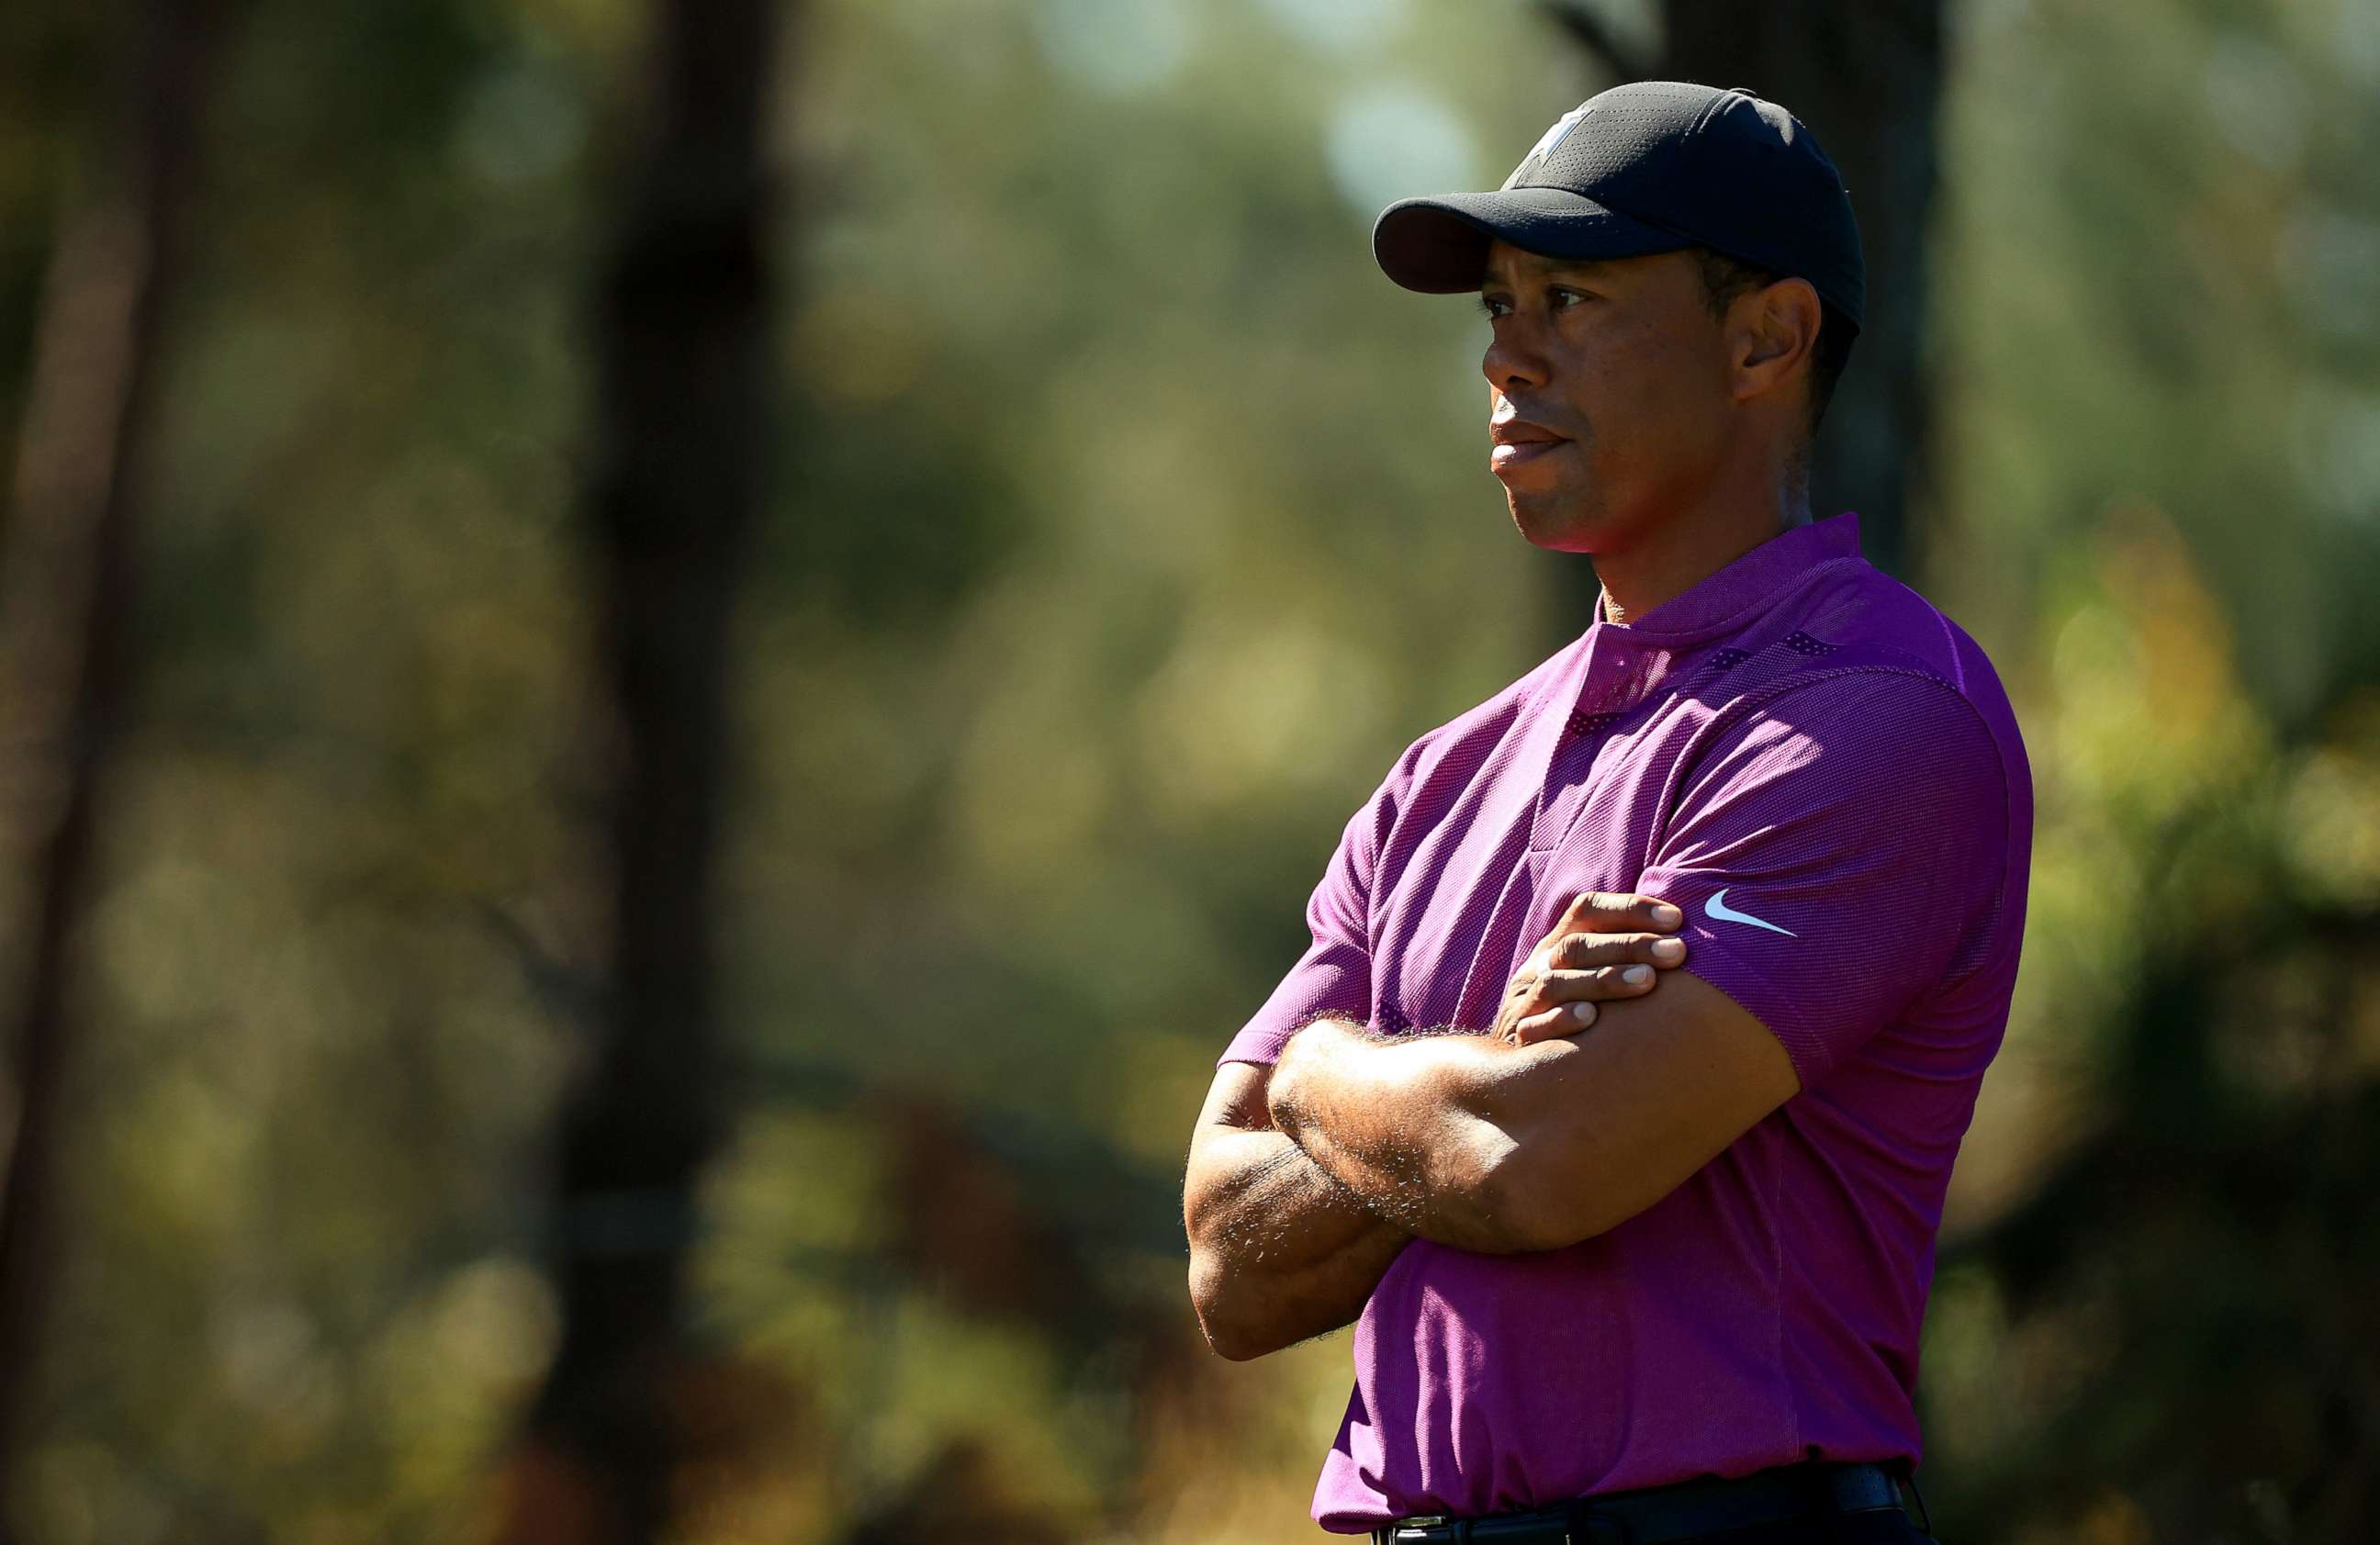 PHOTO: Tiger Woods looks on during the first round of the PNC Championship at the Ritz Carlton Golf Club, Dec. 19, 2020, in Orlando, Florida.